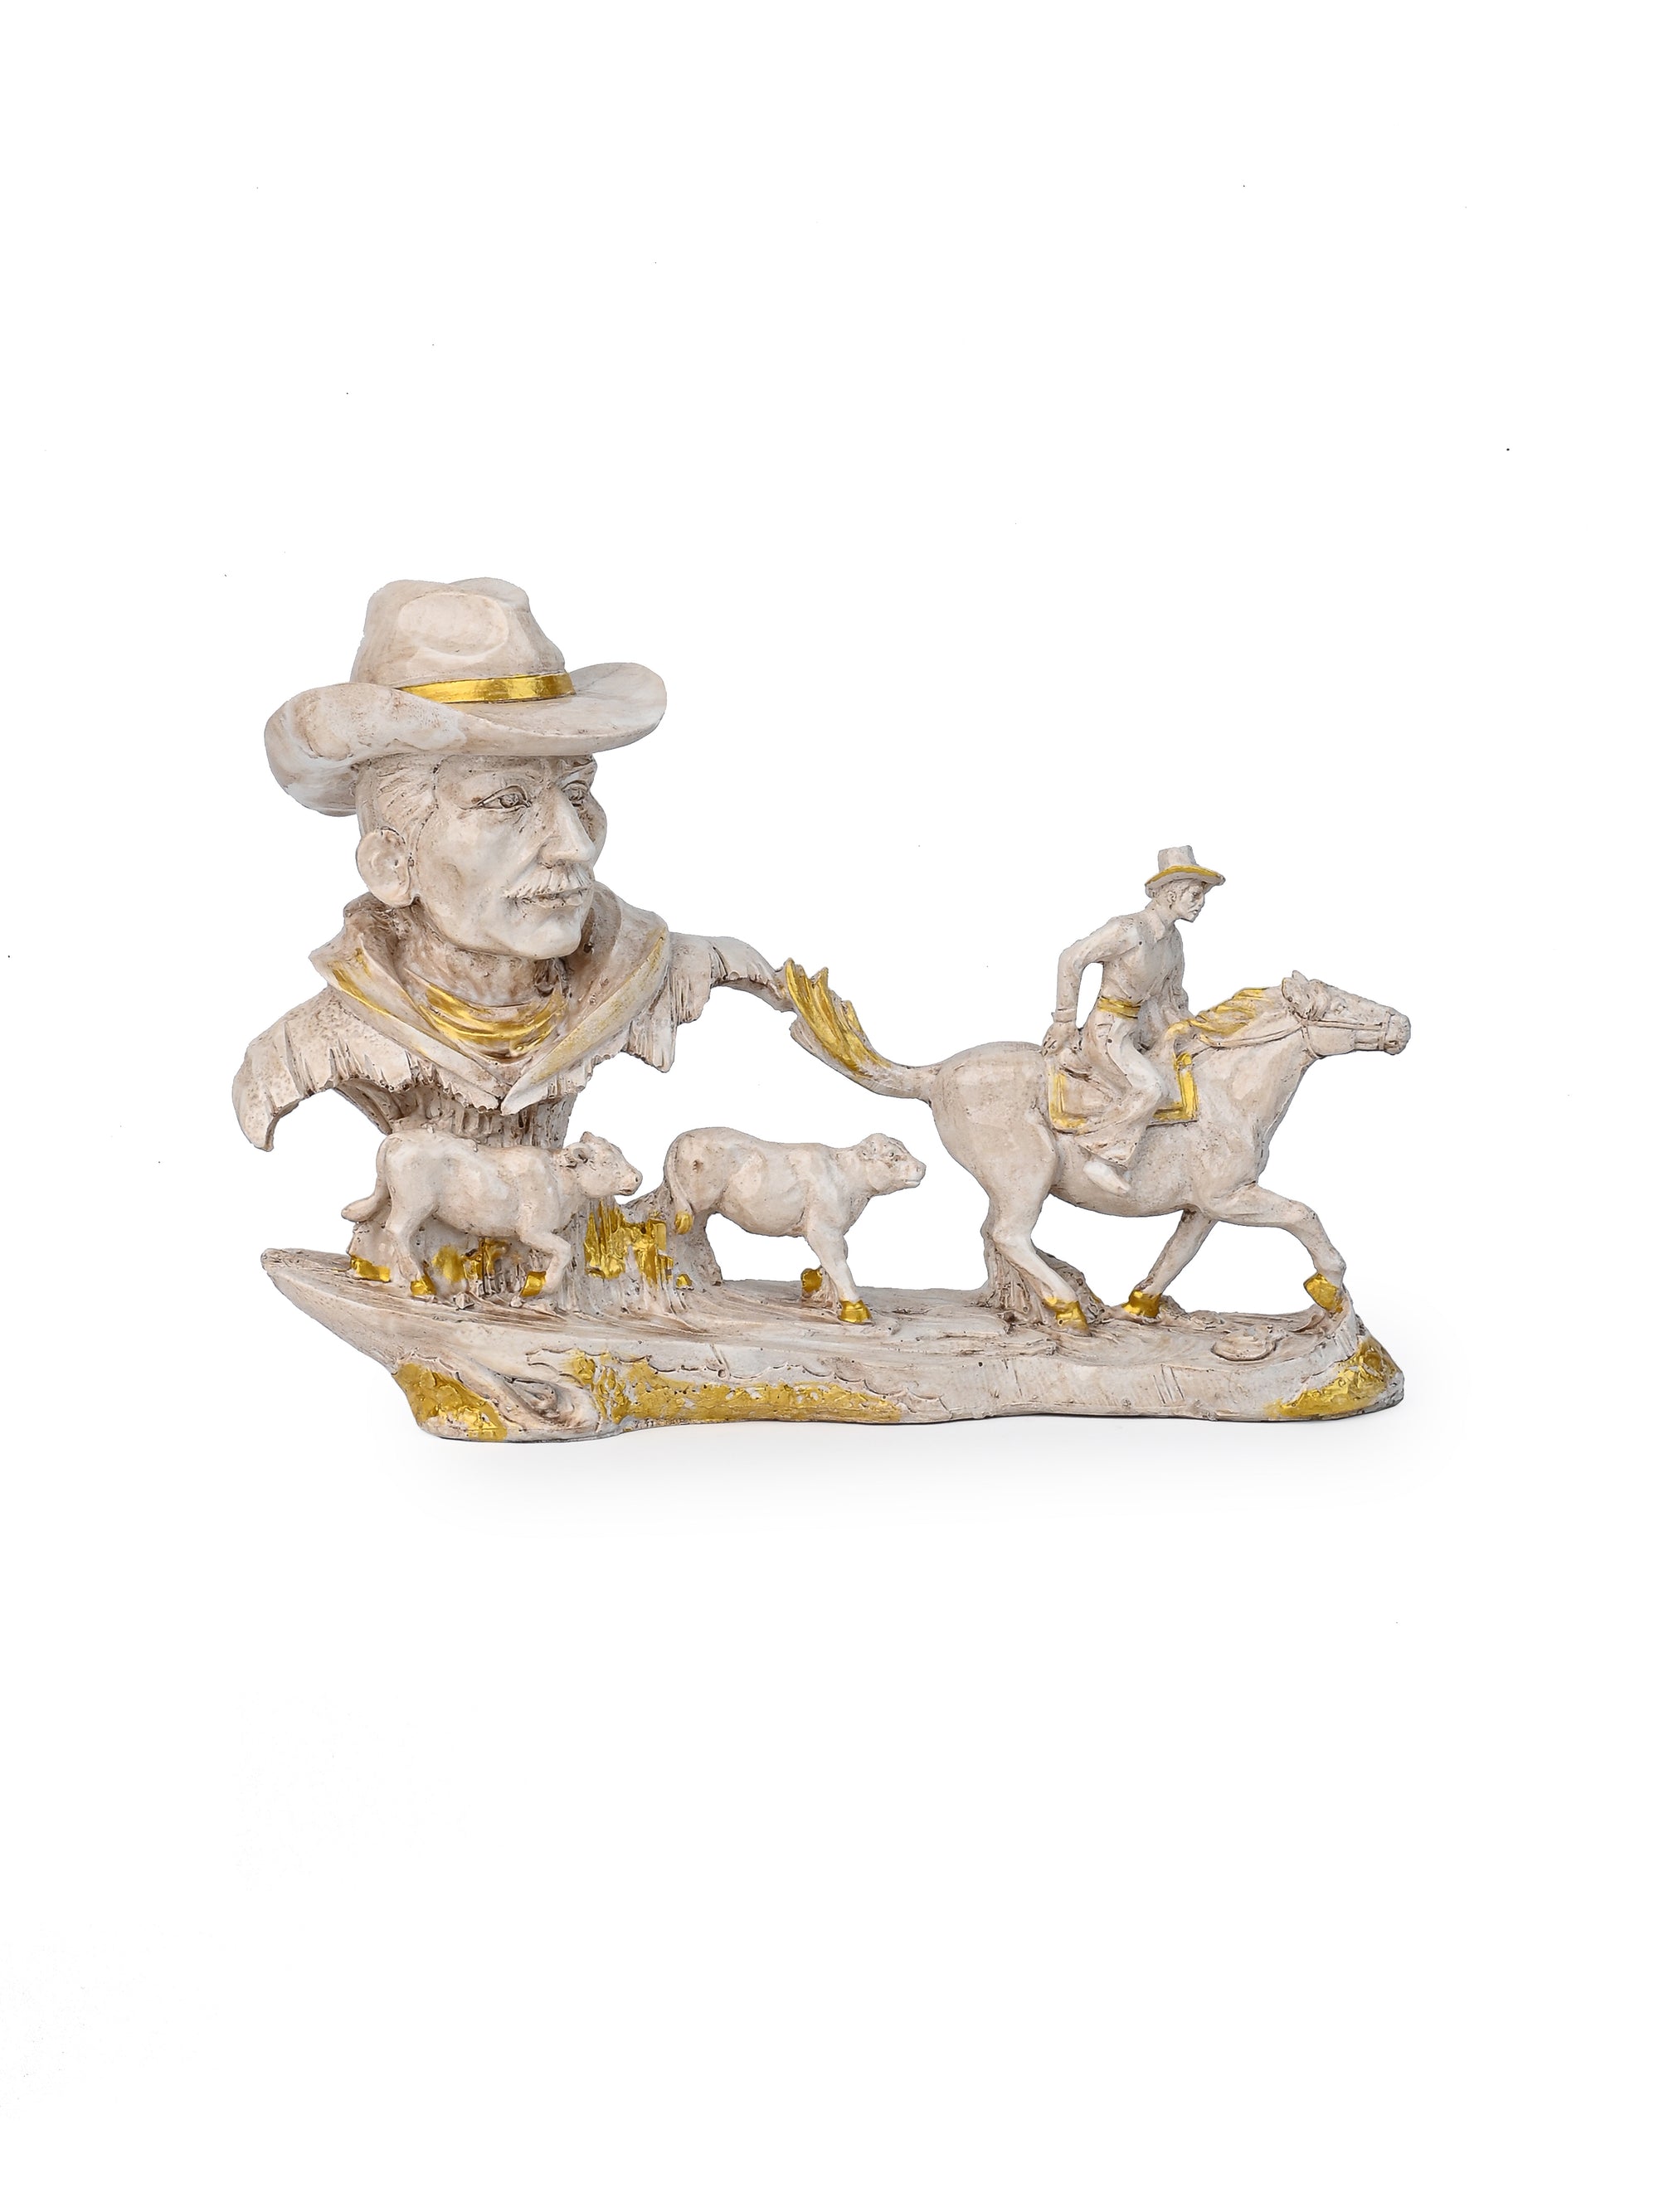 Unique Western Charm - Cowboy with Horse Resin Figurine Home Decor